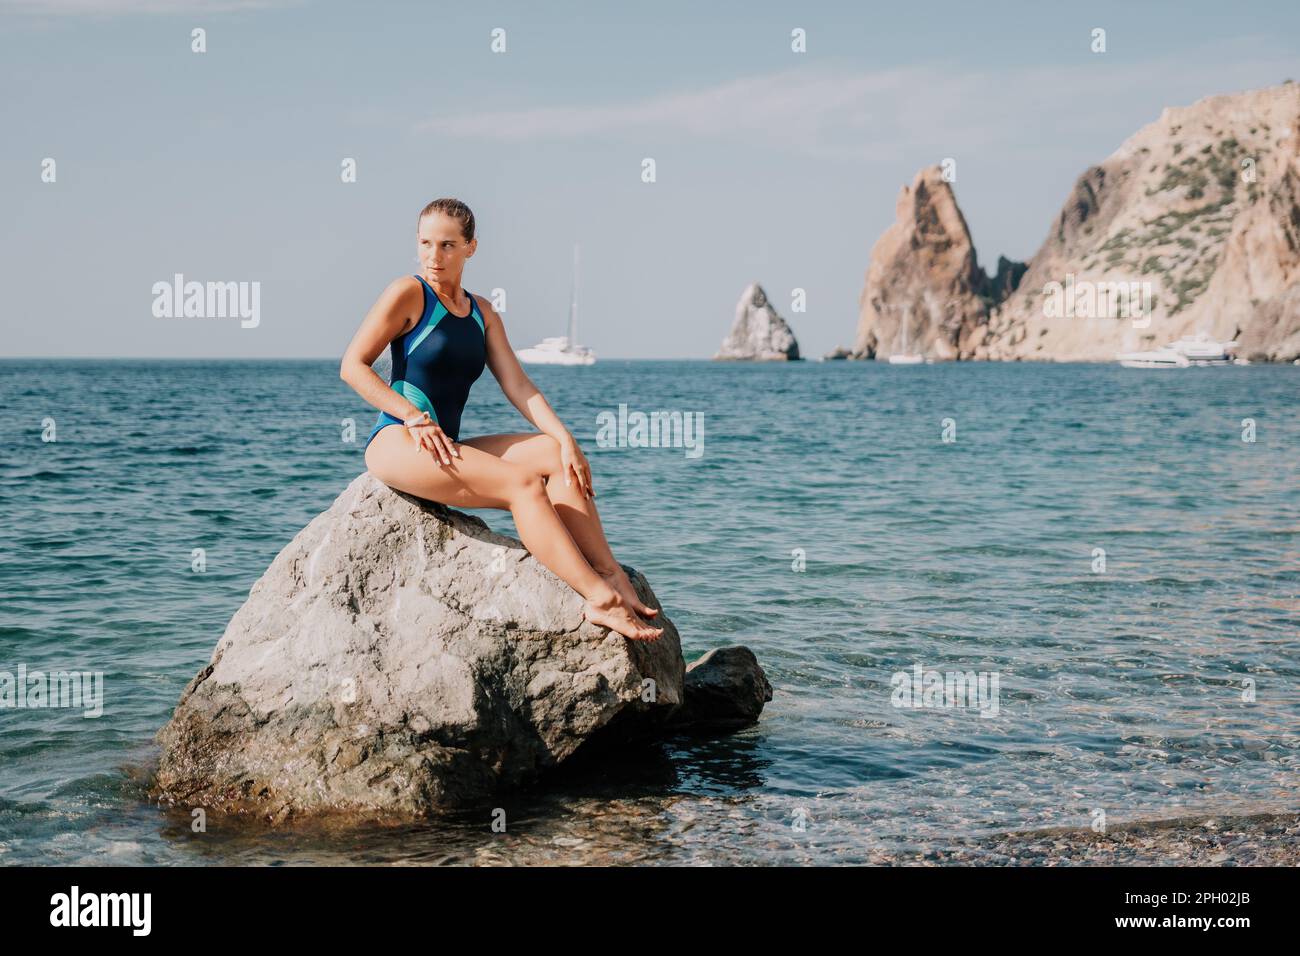 Woman travel sea. Happy tourist in blue swimwear takes a photo outdoors to capture memories. woman traveling and enjoying her surroundings on the Stock Photo